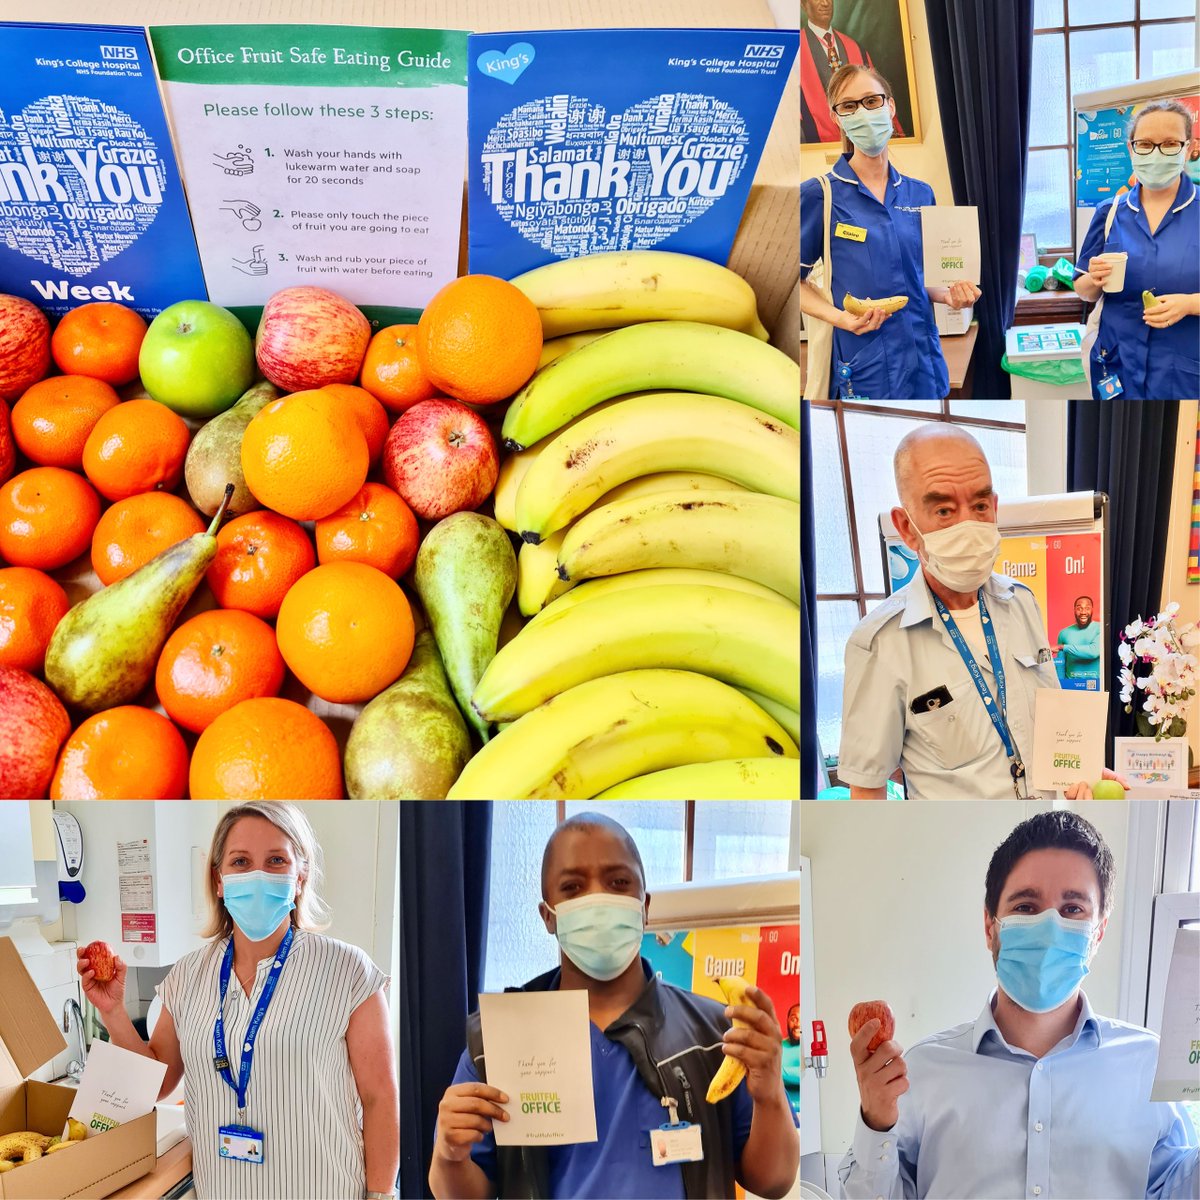 For our #ThankYouThursday celebrations, we'd like to say a huge thank you to @fruitfuloffice for delivering fruit every Tuesday since the beginning of the pandemic for our #TeamKings staff 👏.